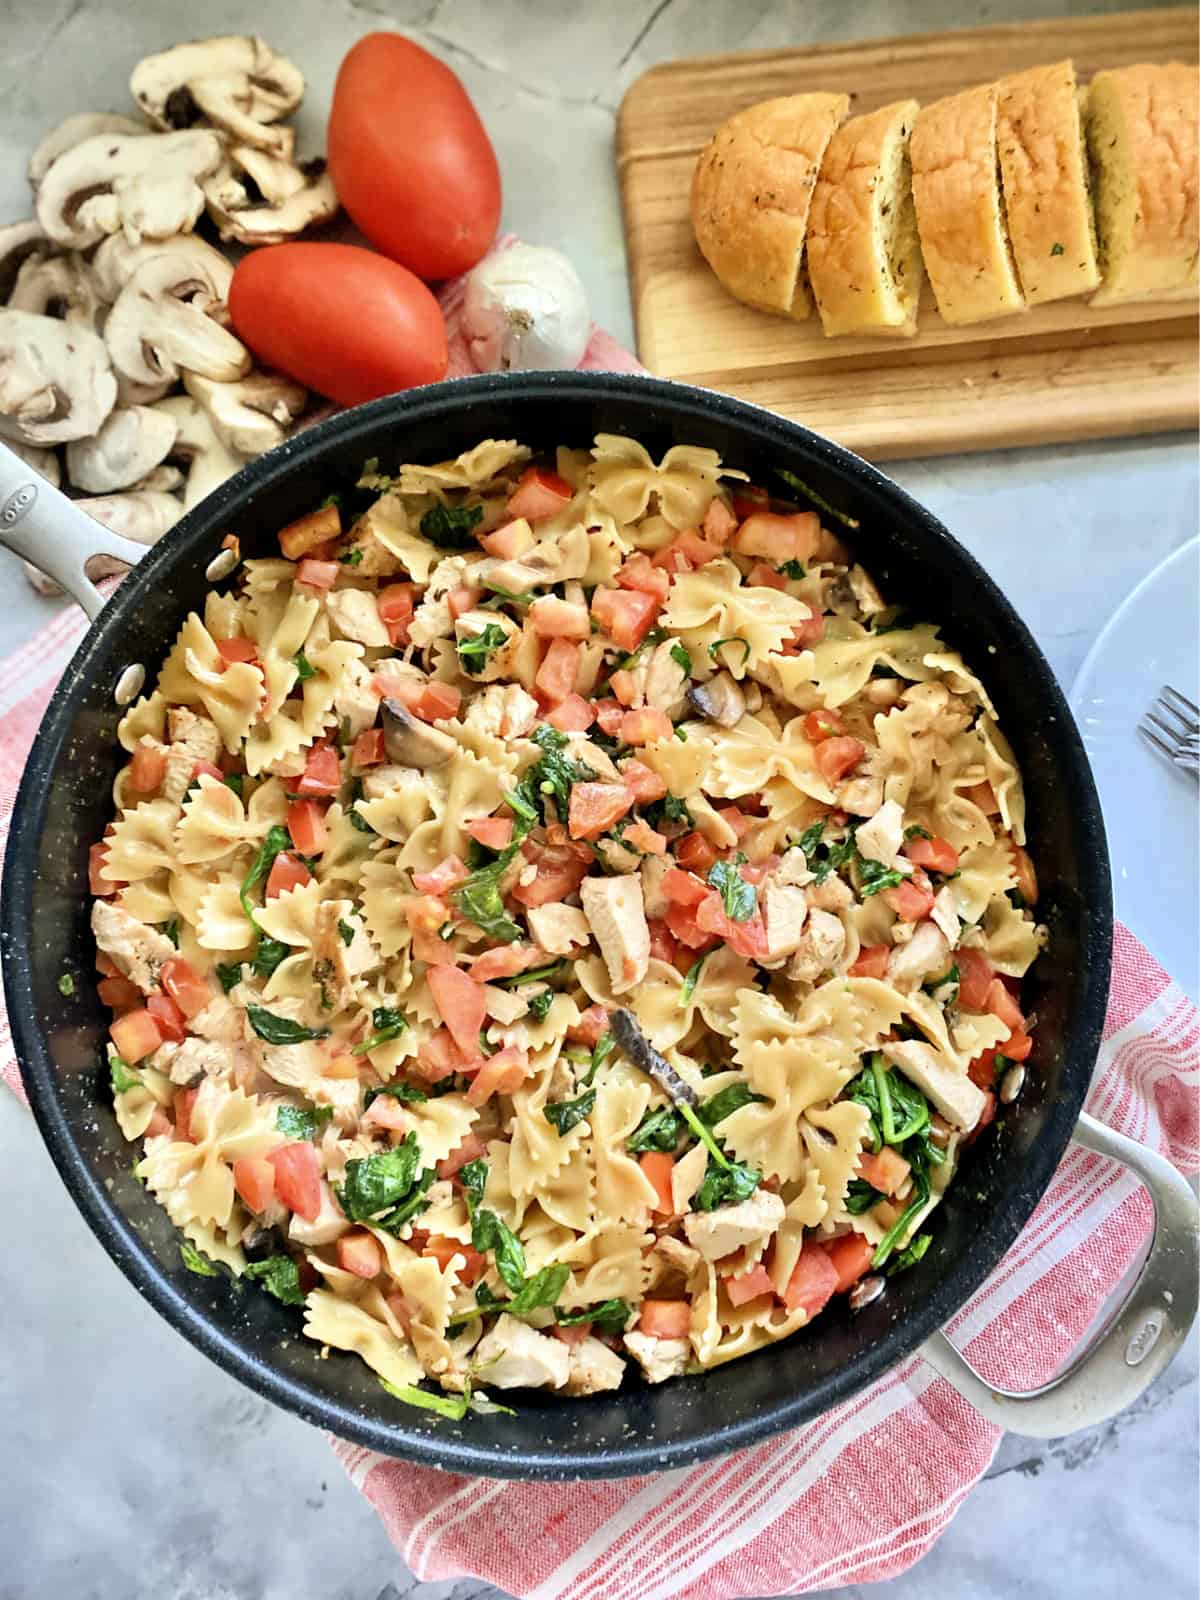 Top view of a large OXO black skillet filled with bow tie pasta, chicken, spinach and tomatoes.